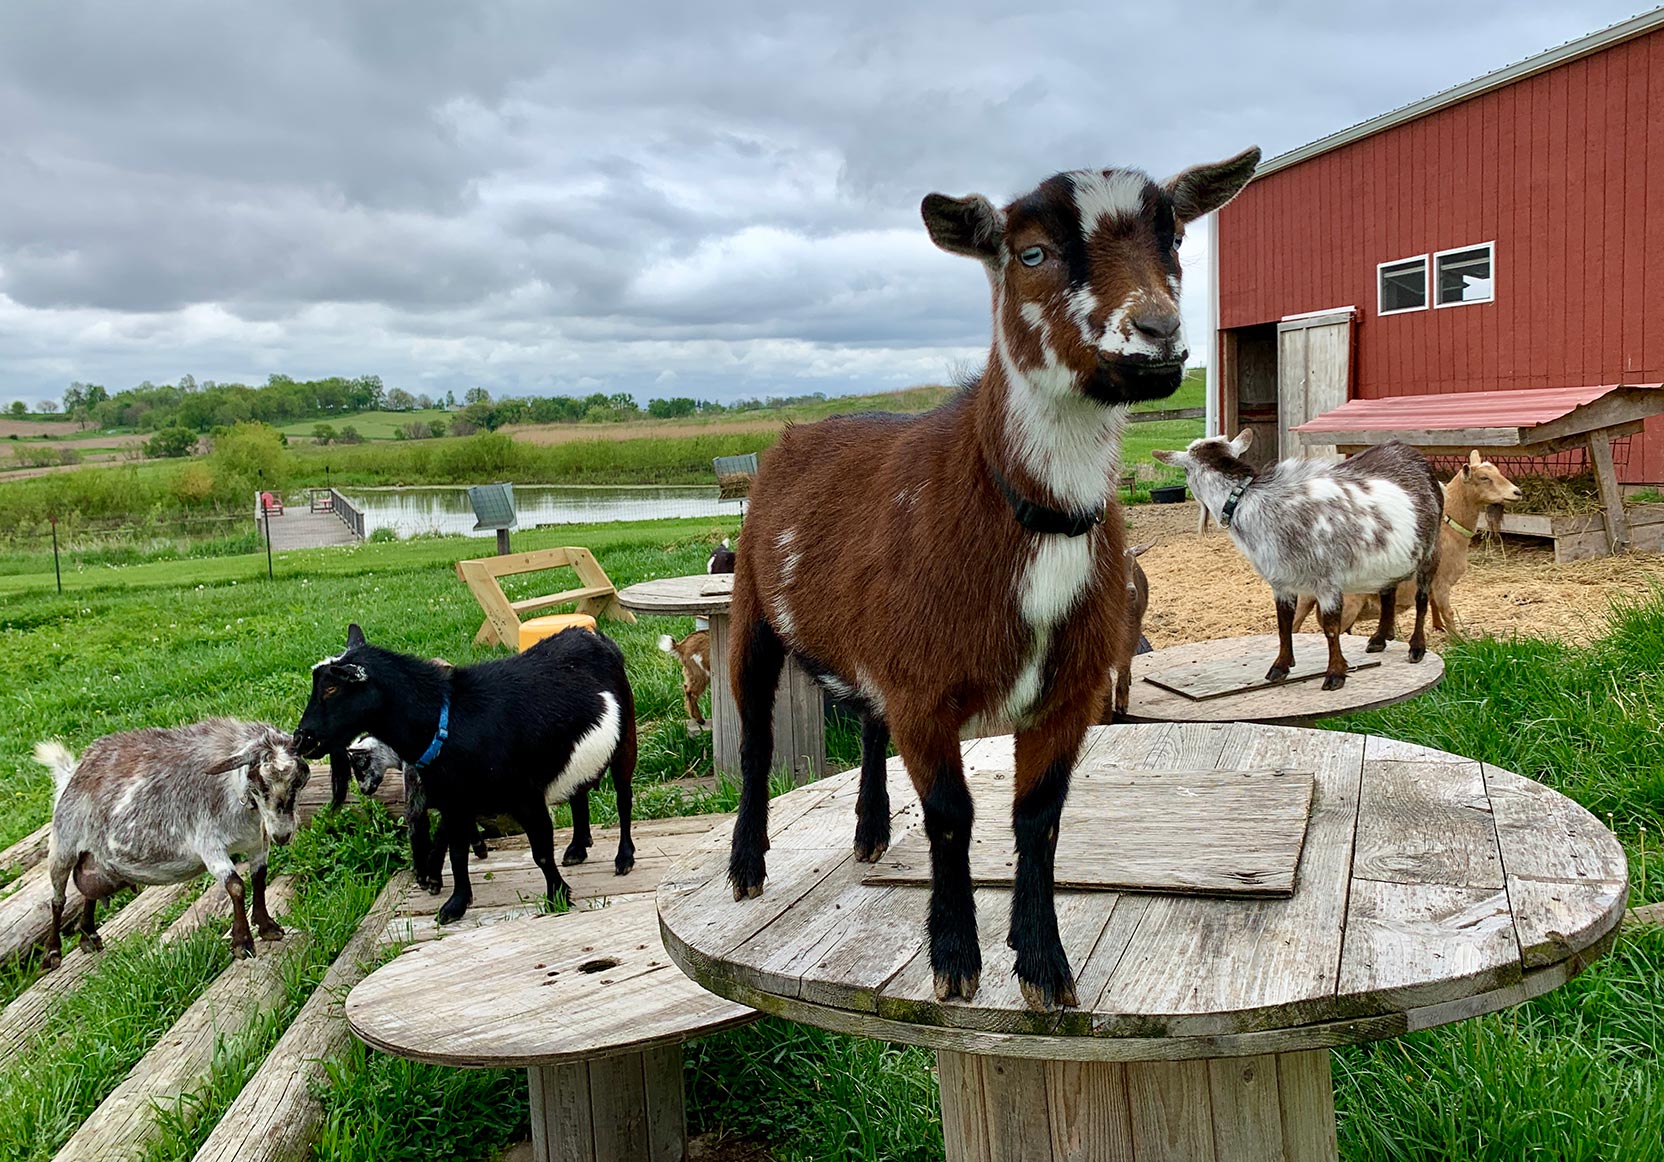 A goat standing on a wooden table, with other goats and a barn in the background